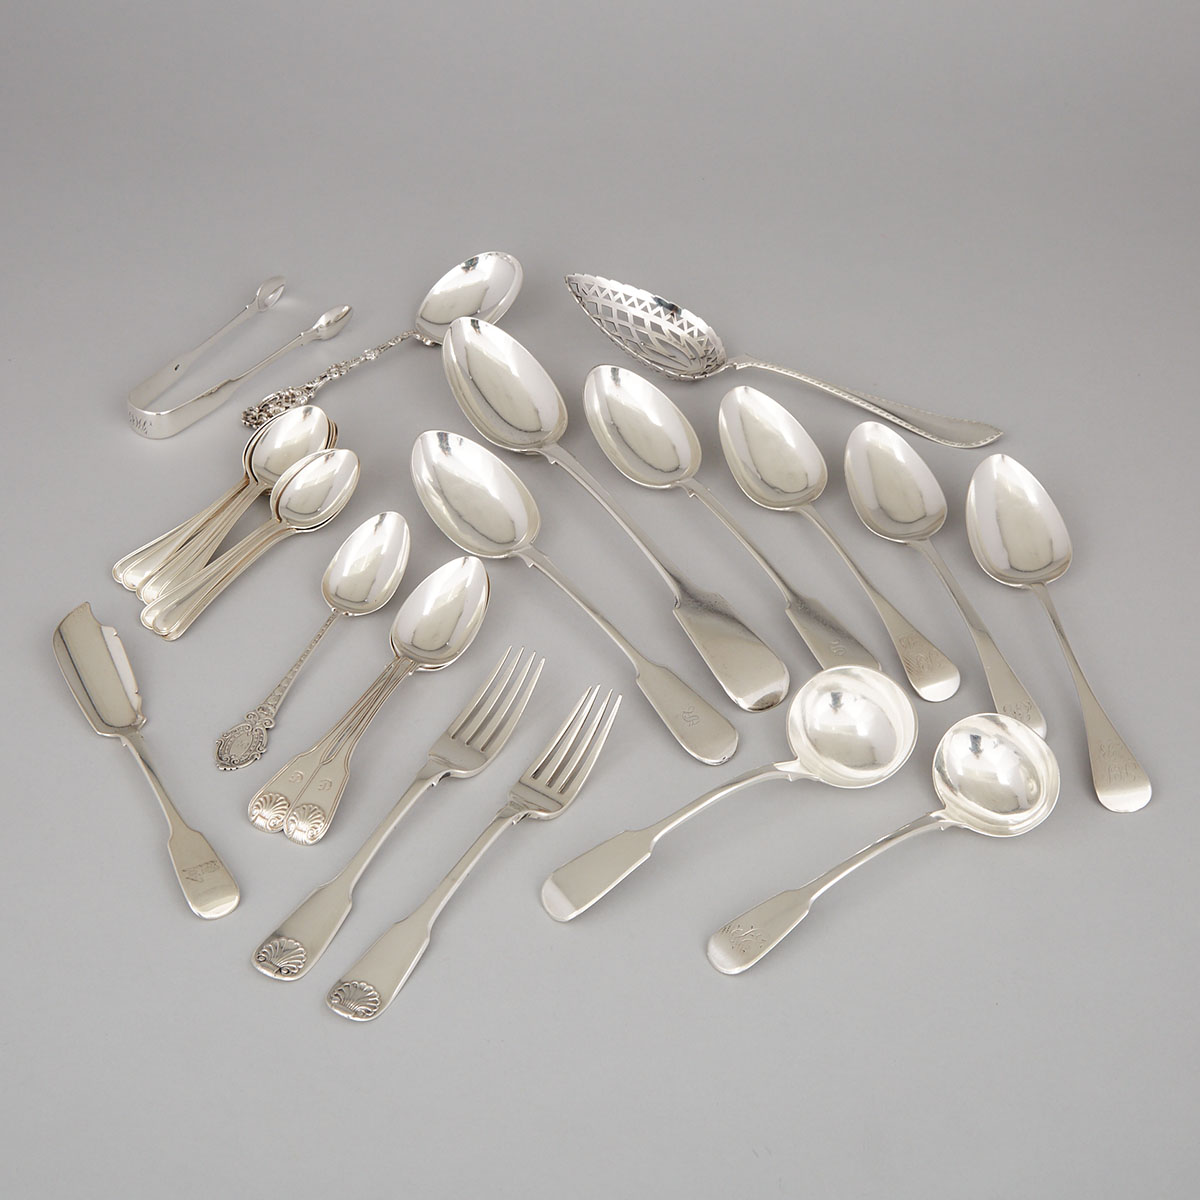 Group of English, Dutch and North American Silver Flatware, 18th-20th century